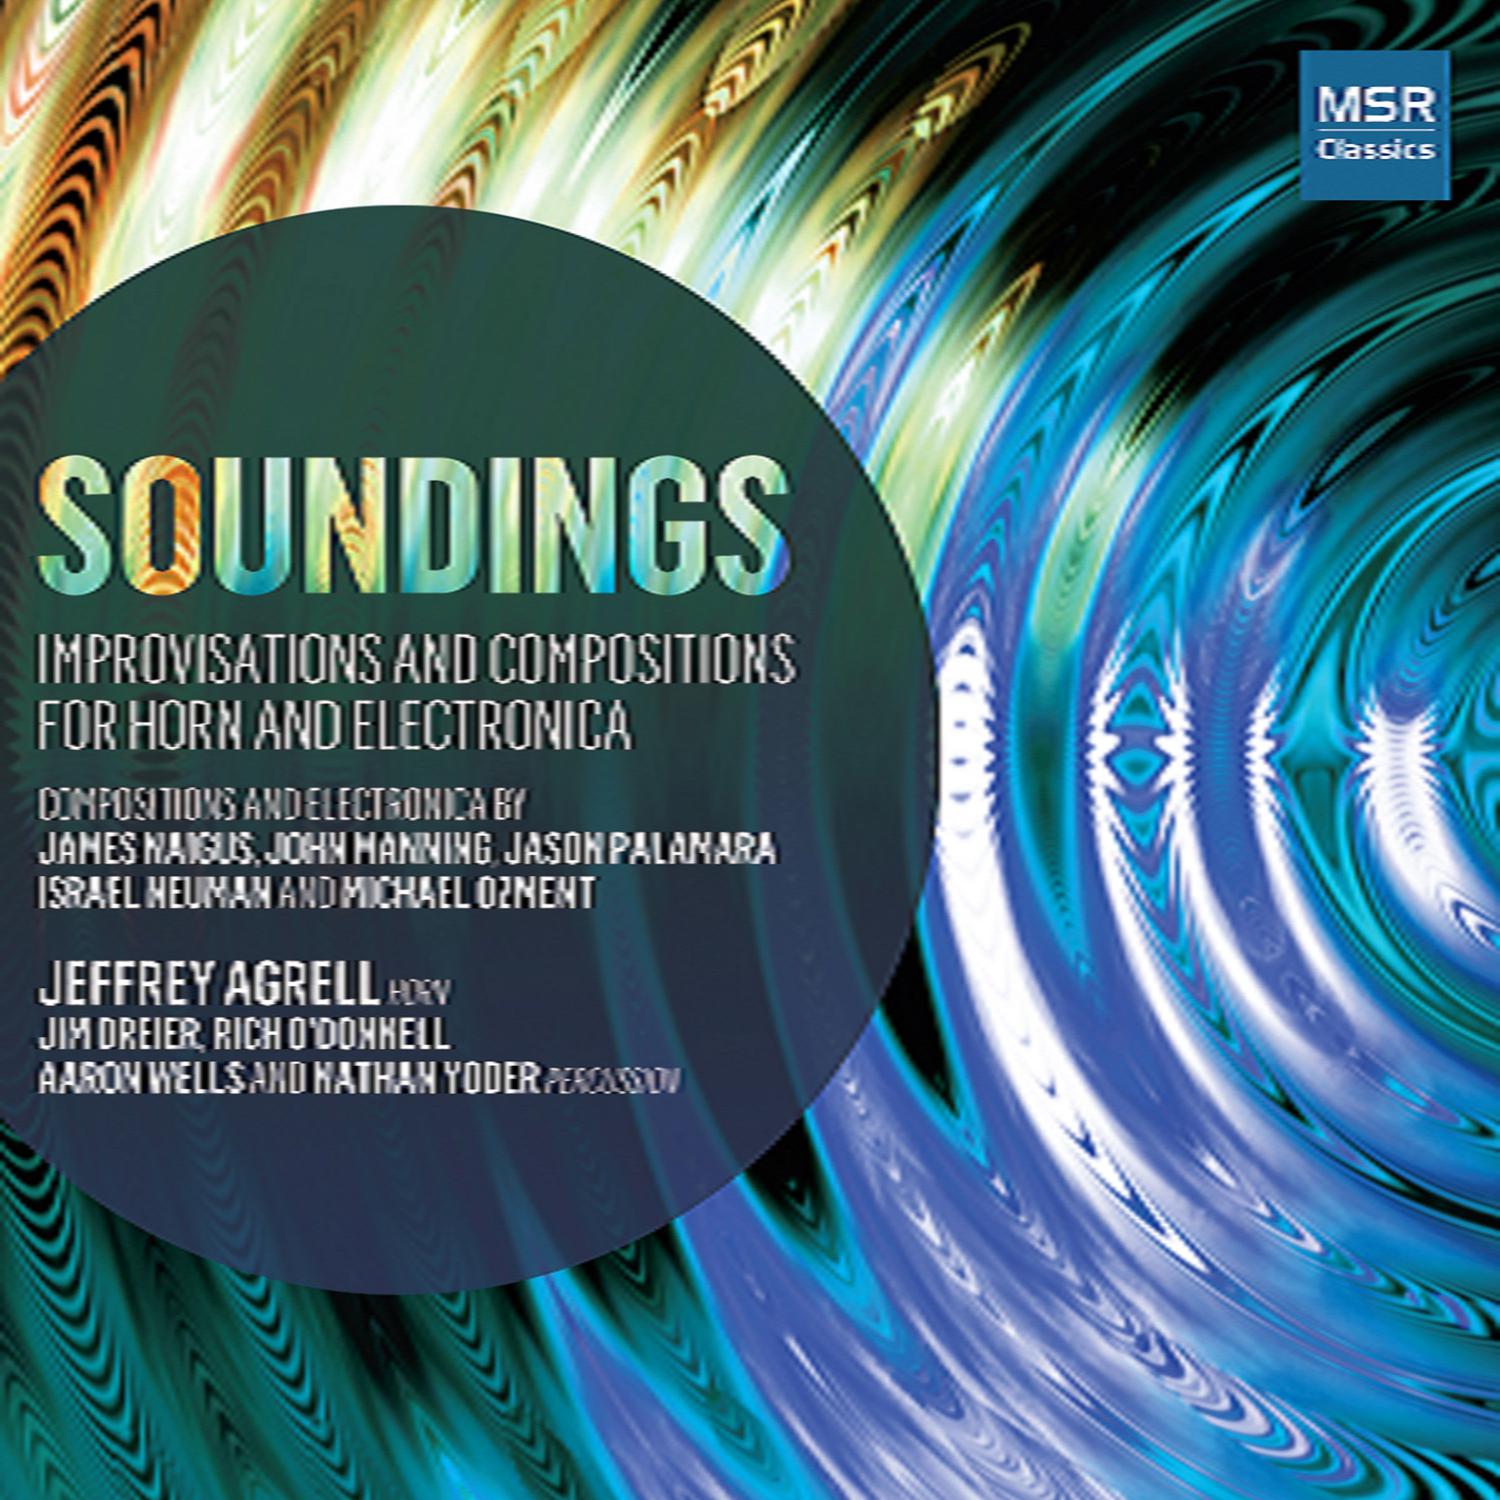 Jeffrey Agrell - Improv Sonata - Improvisations for Horn with Electronic Effects: III. Out of My Way